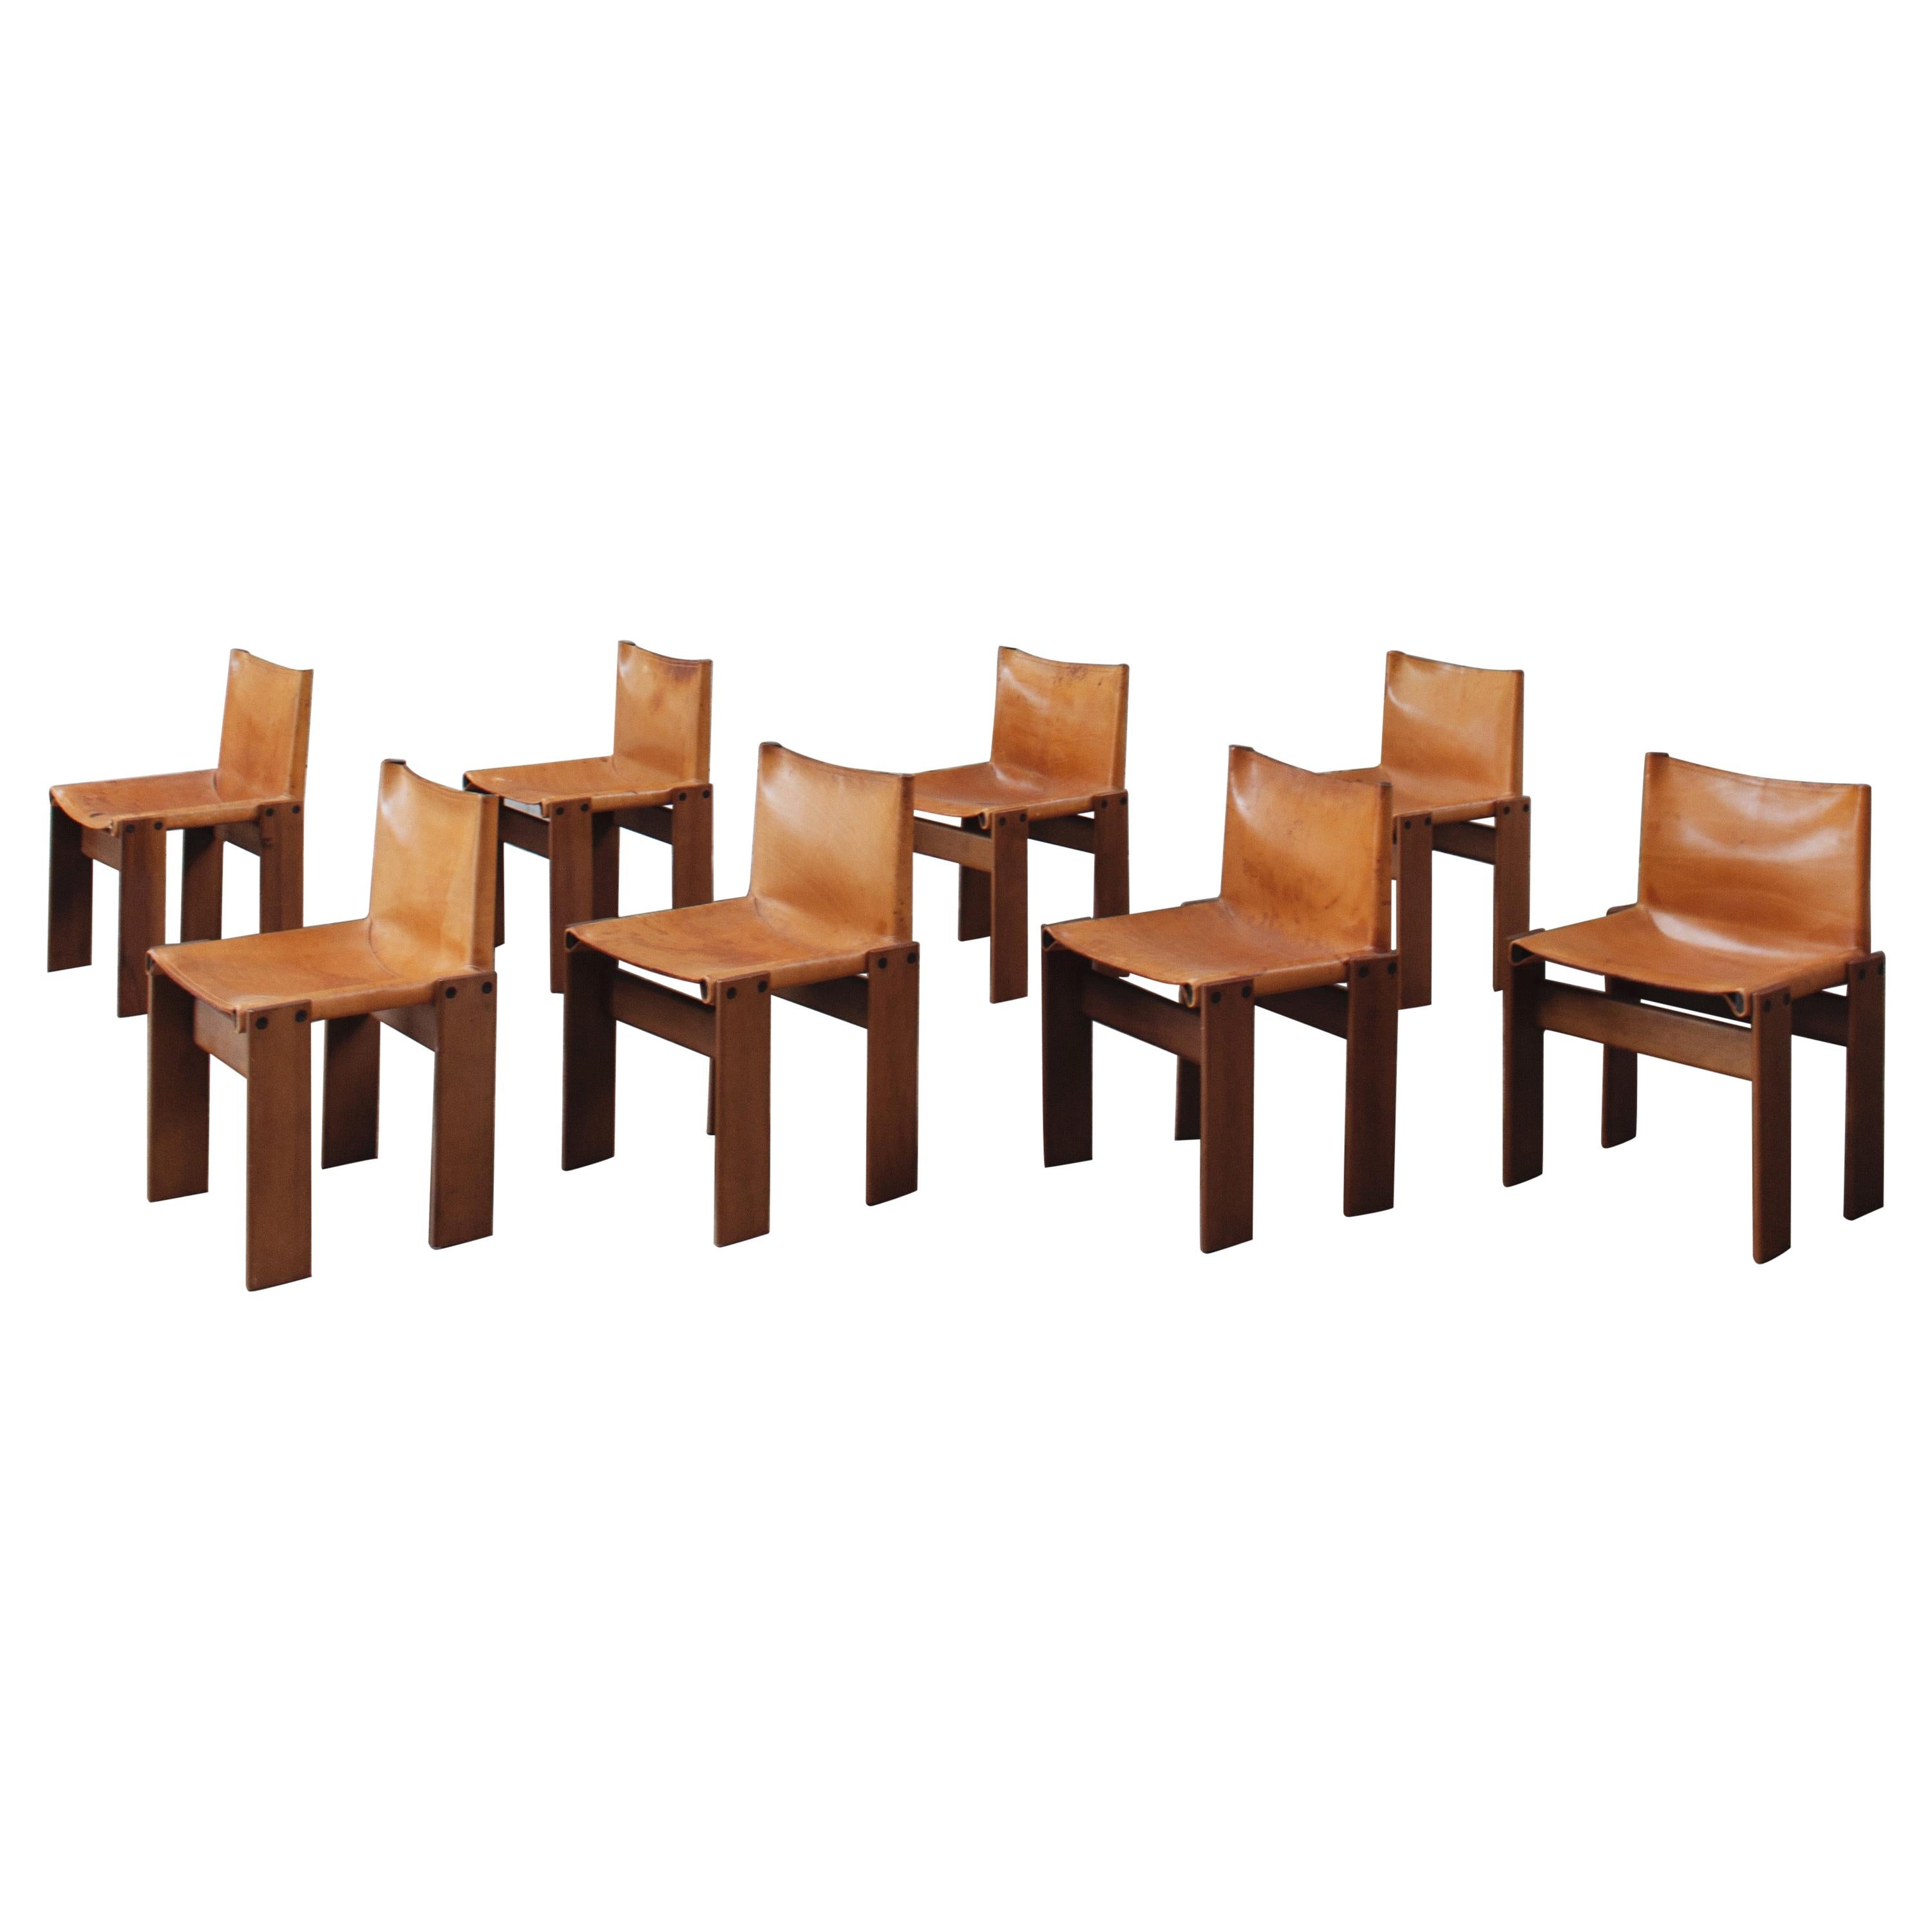 Afra & Tobia Scarpa "Monk" Chairs by Molteni in Cognac Leather, 1974, Set of 8